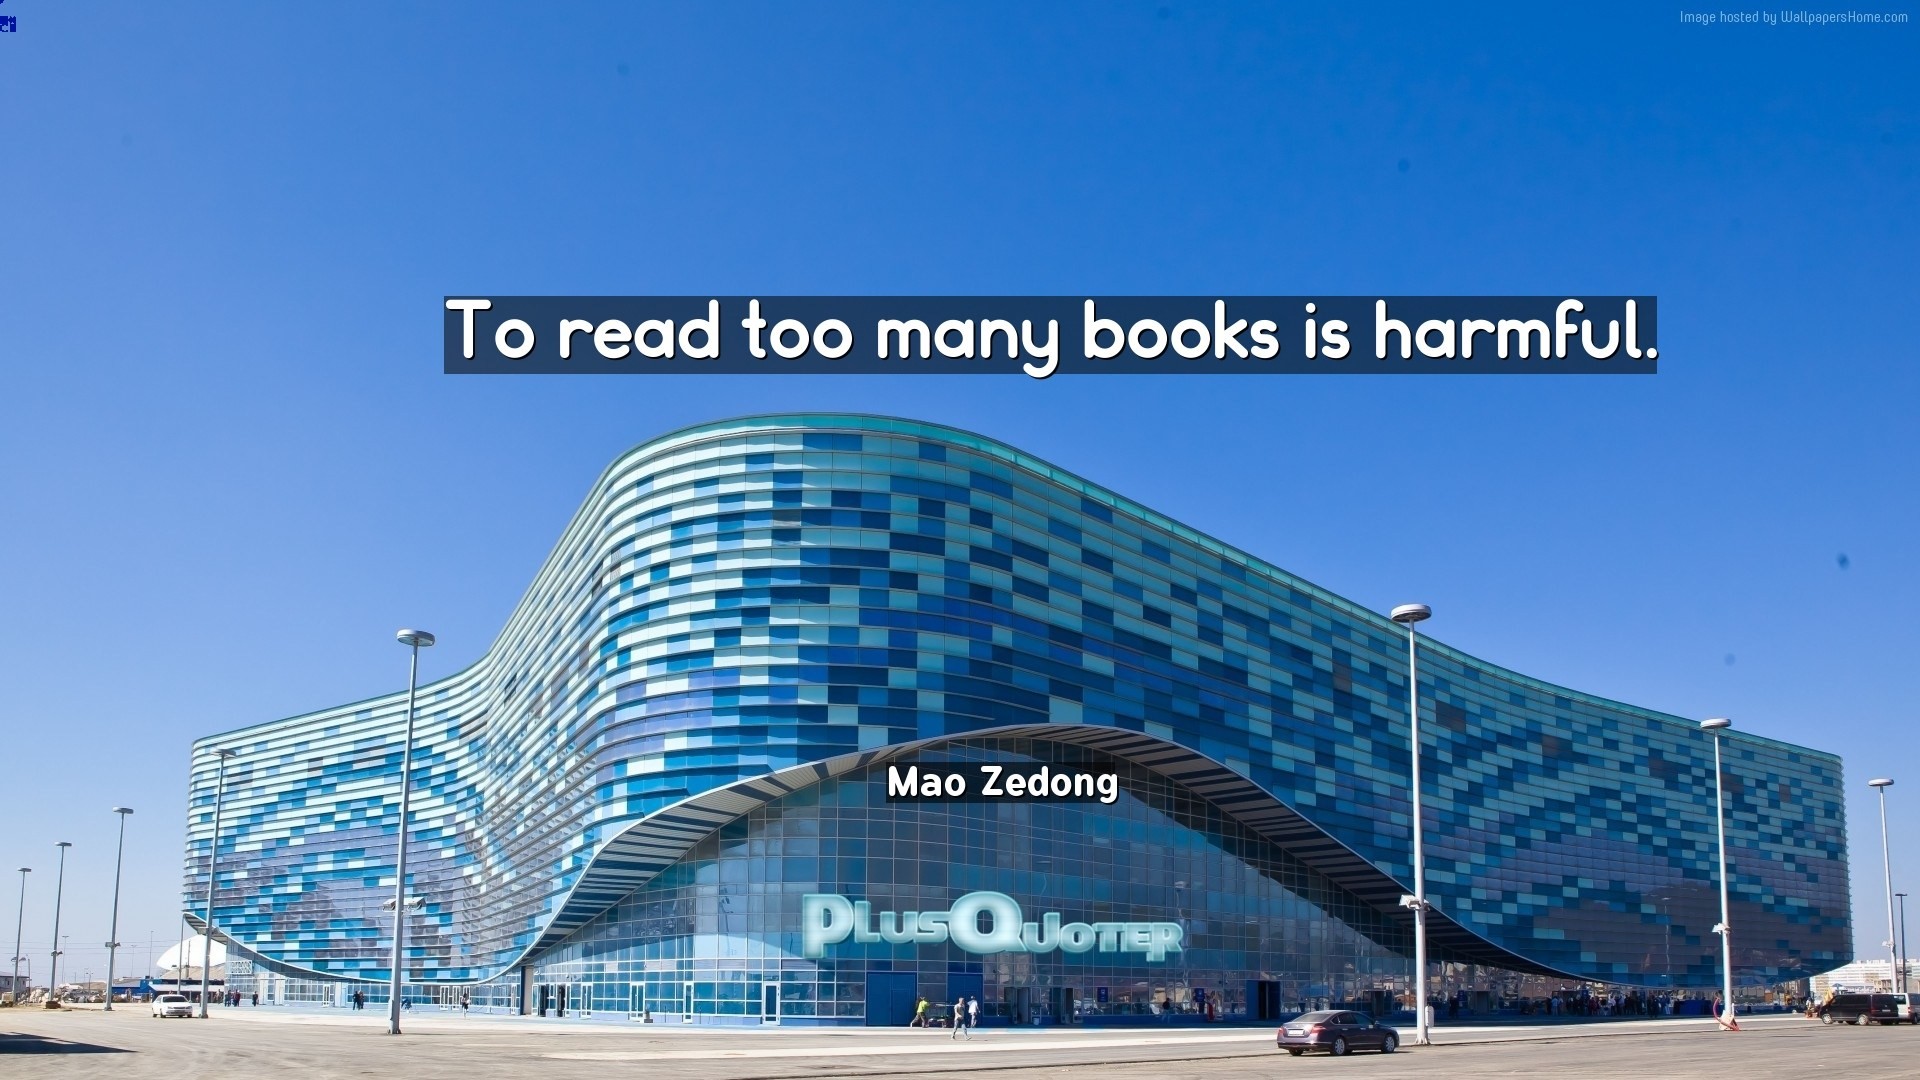 1920x1080 Download Wallpaper with inspirational Quotes- "To read too many books is  harmful."